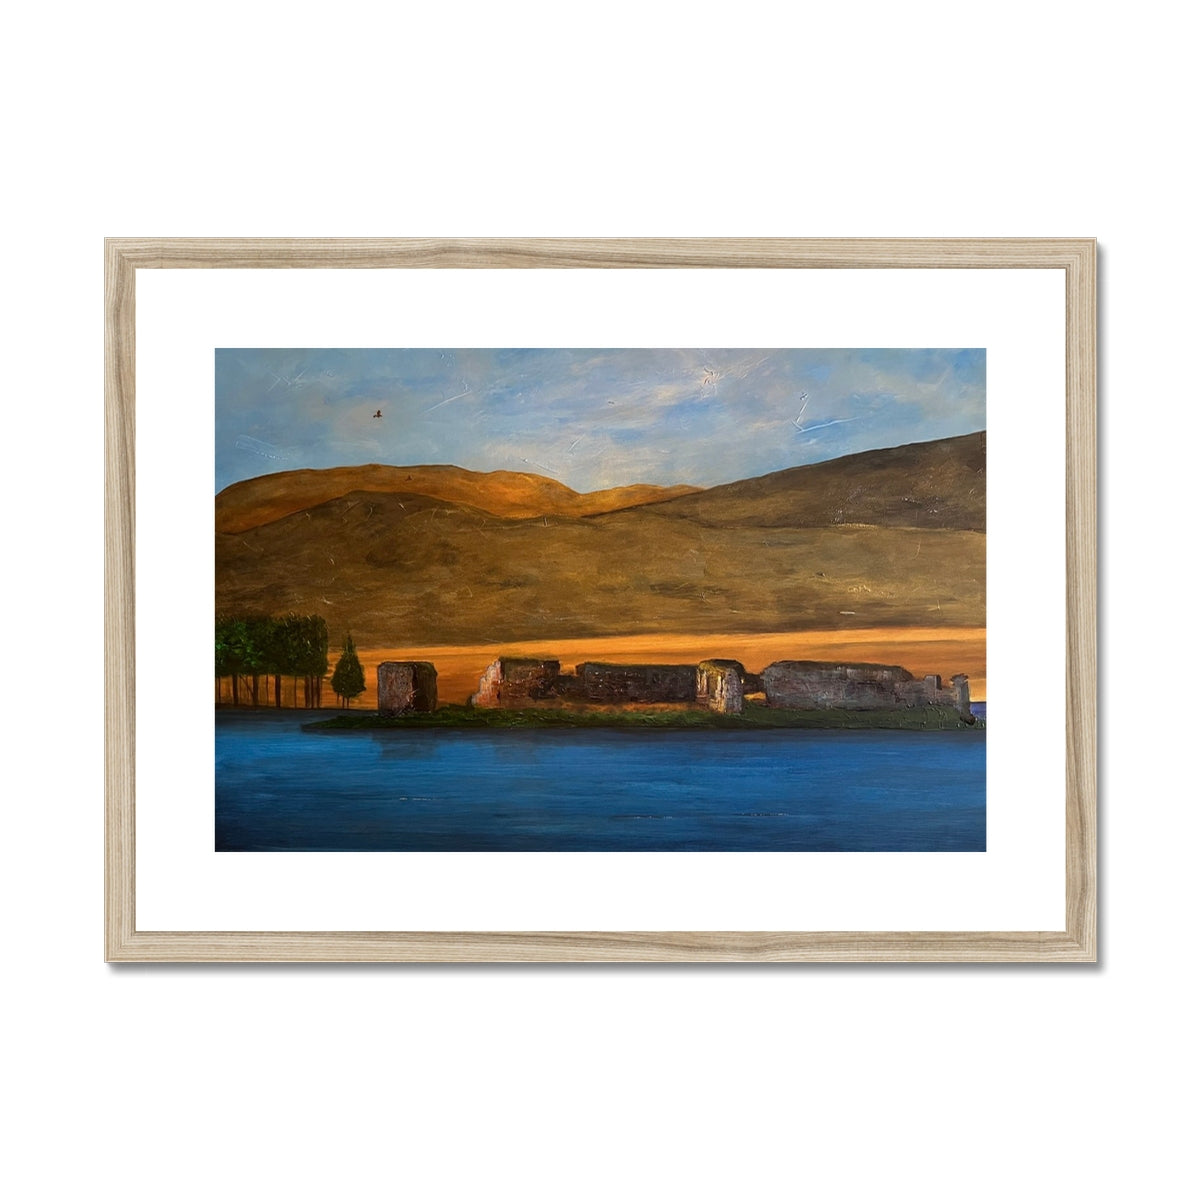 Lochindorb Castle Painting | Framed & Mounted Prints From Scotland-Framed & Mounted Prints-Scottish Lochs & Mountains Art Gallery-A2 Landscape-Natural Frame-Paintings, Prints, Homeware, Art Gifts From Scotland By Scottish Artist Kevin Hunter